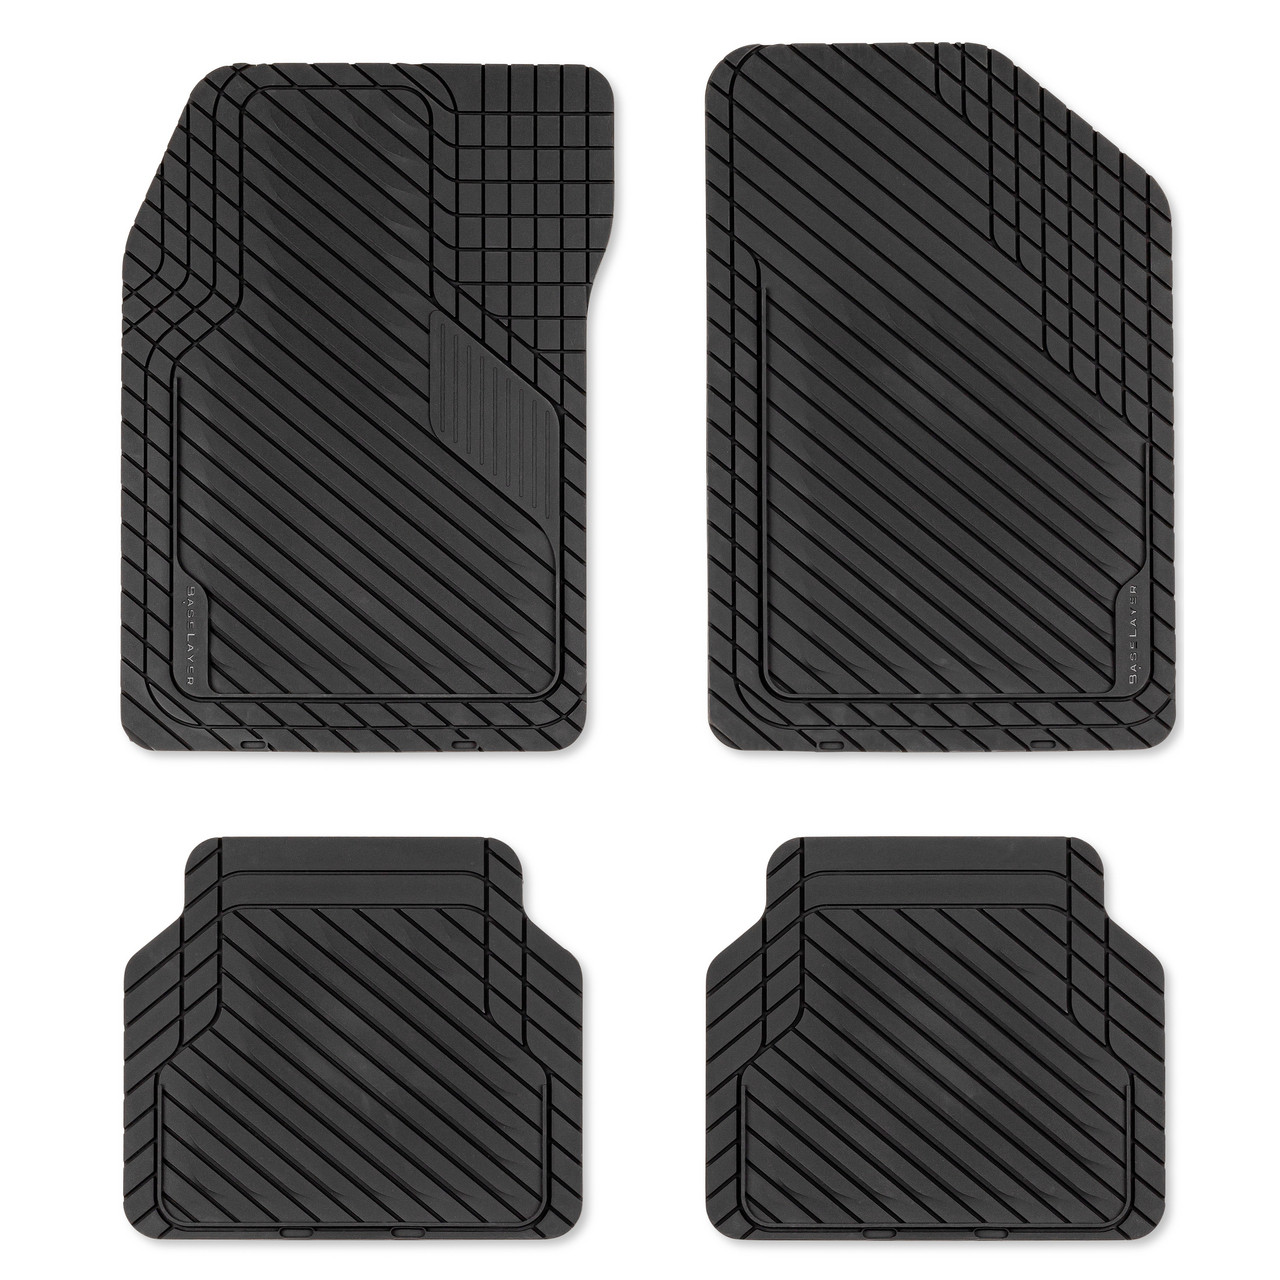 Baselayer Cut-to-Fit Black 4-Piece Car Mat Set - Universal Waterproof Floor Mats for Most Vehicles, Durable All-Weather Mats - Made in USA